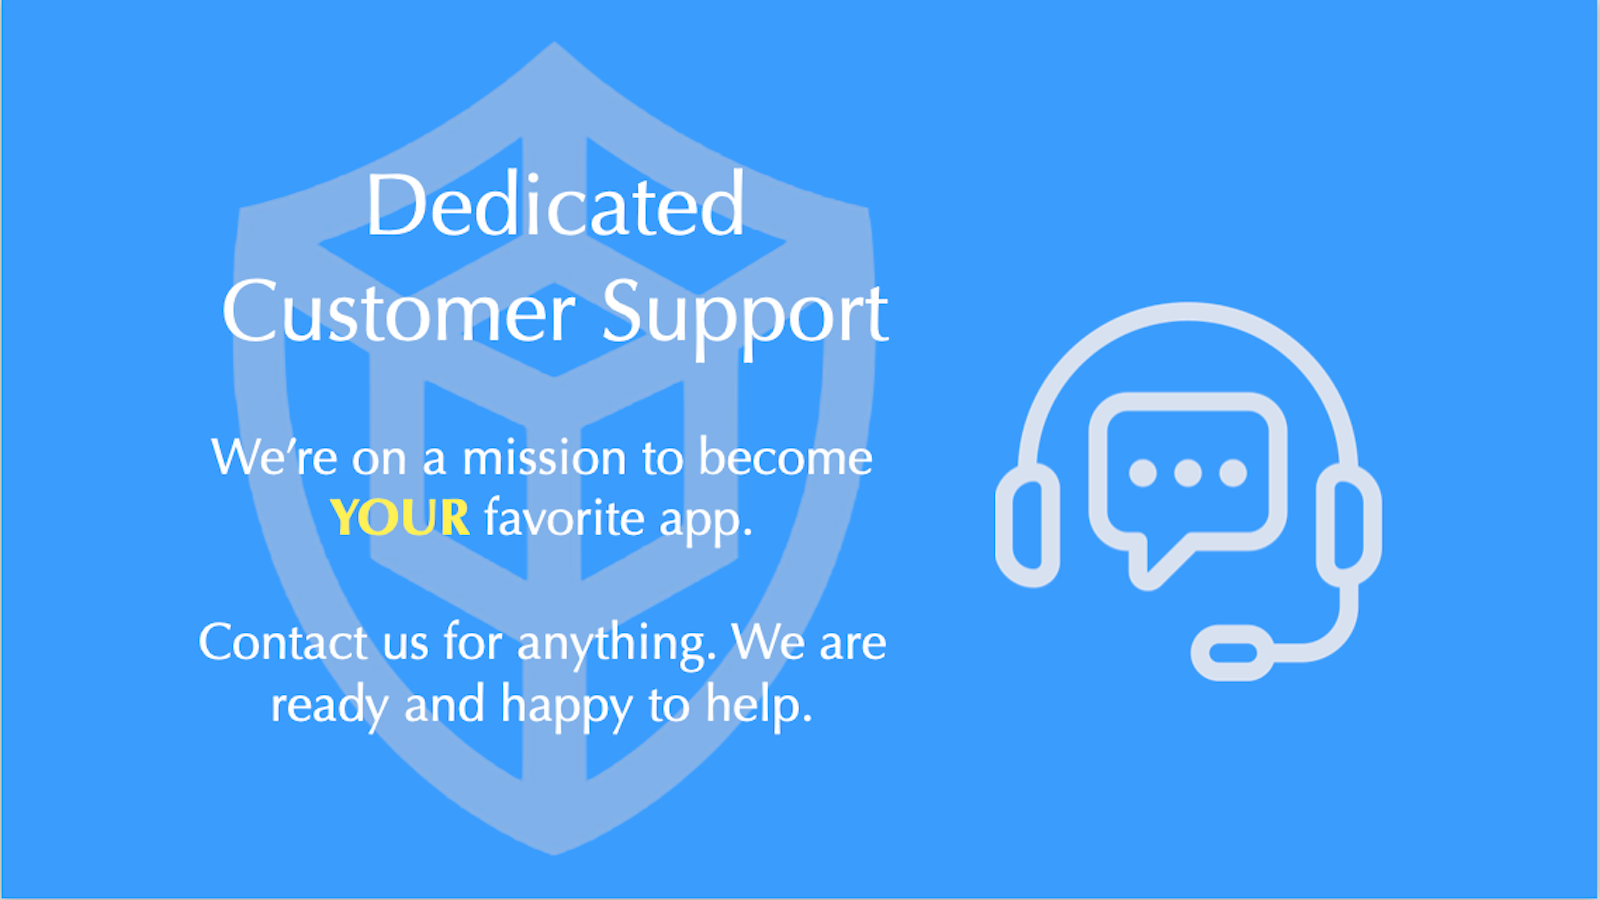 Customer support ready and excited to help you.